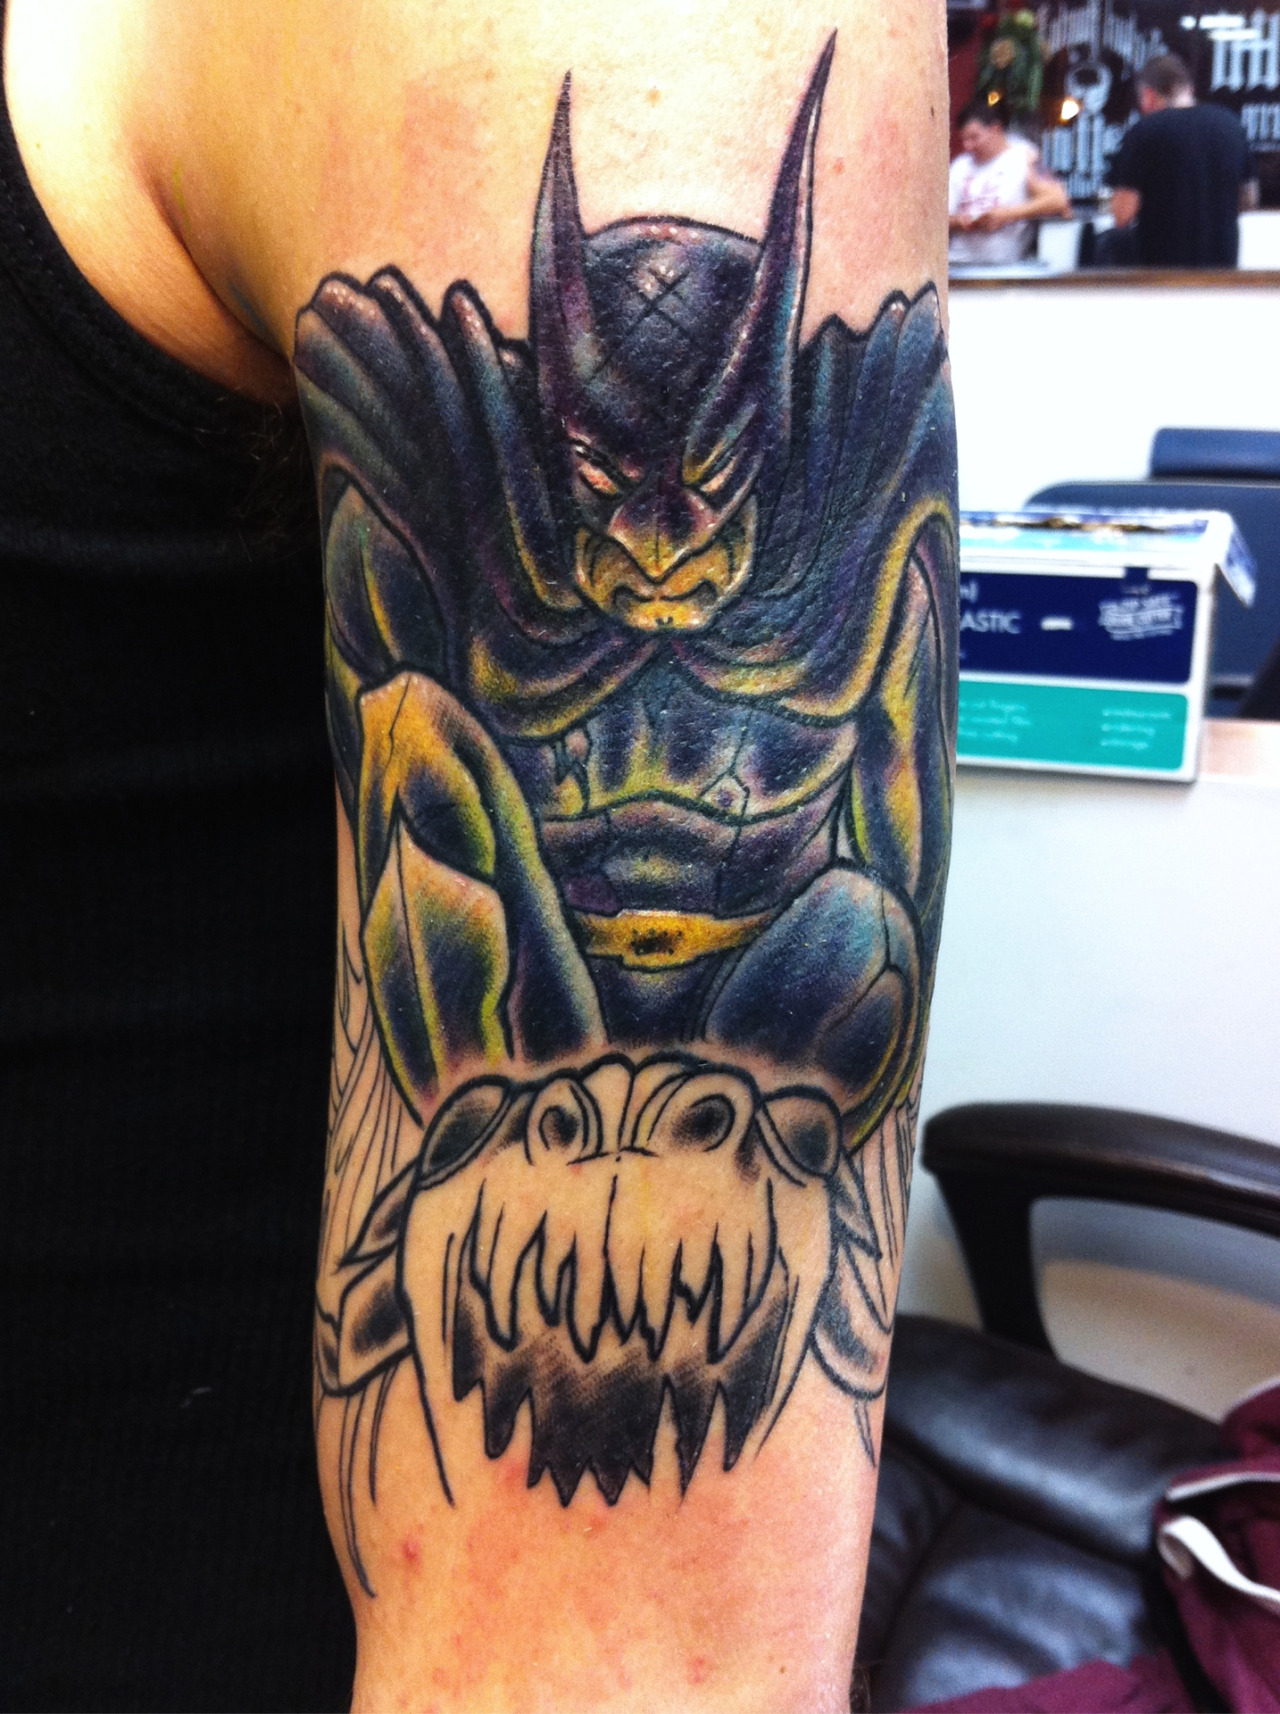 tattoo of Batman and the Joker on a full arm on Craiyon